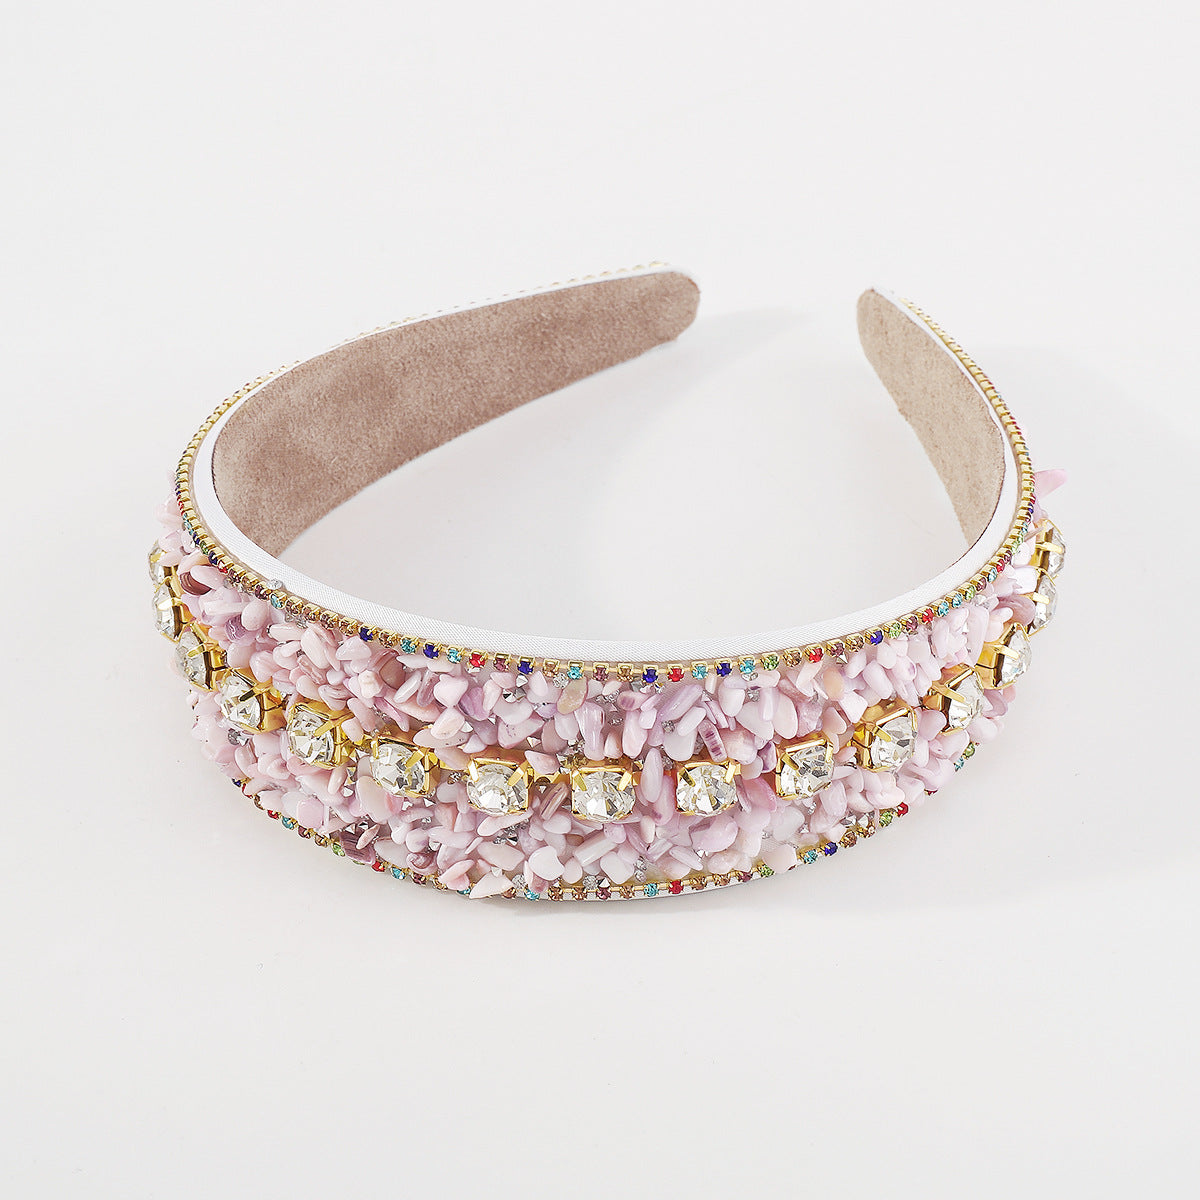 DANIELLE Retro Crushed Stone Studded Candy Color Headband